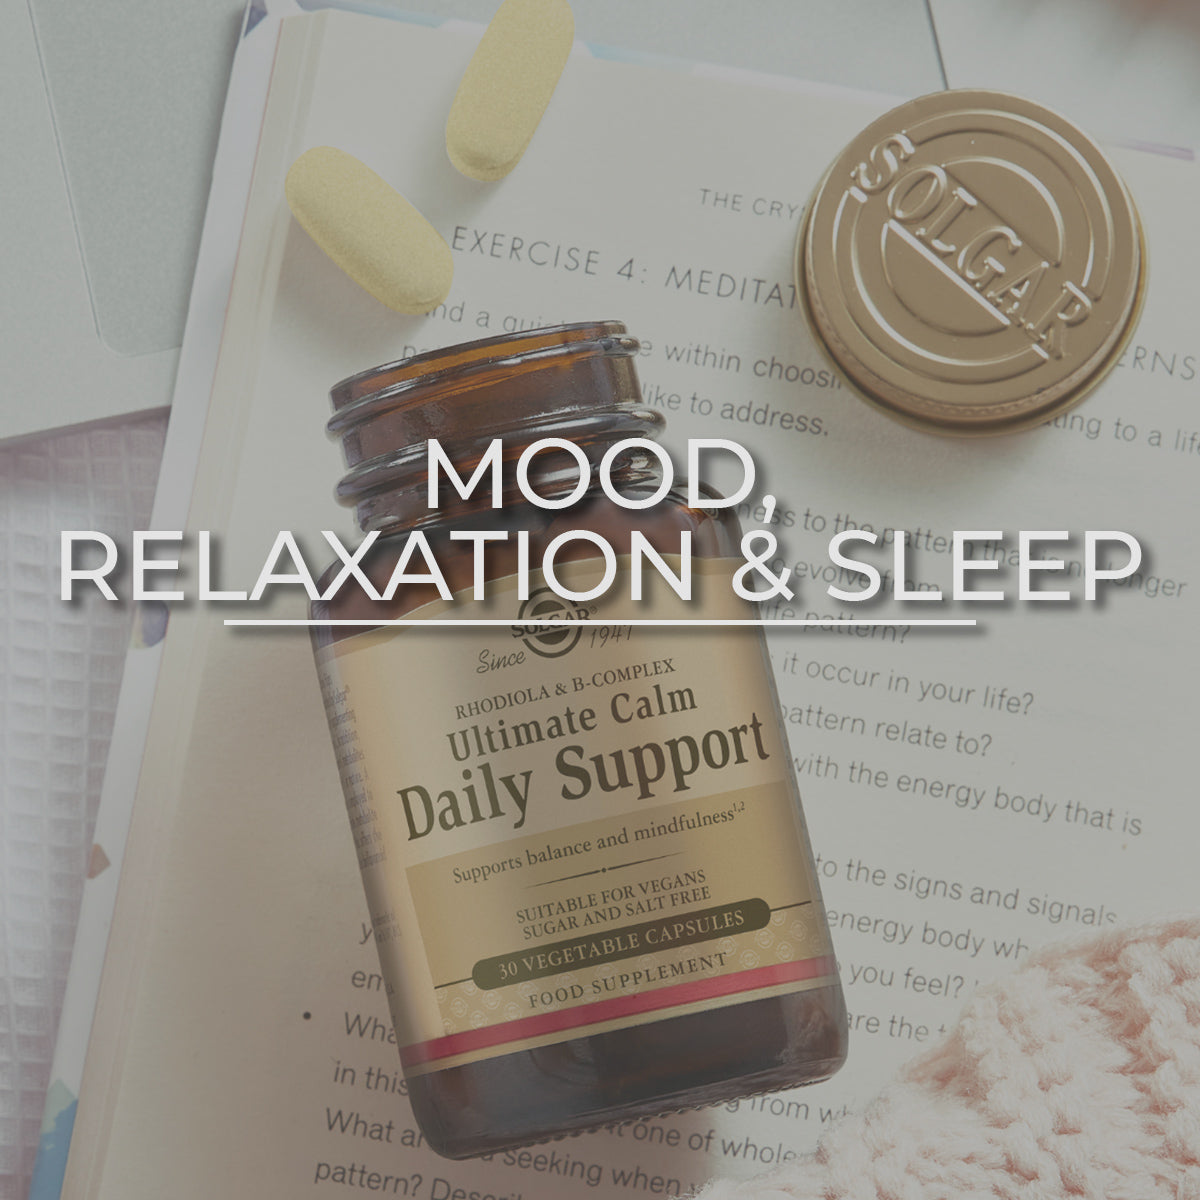 Click here to browse by Mood, relaxation & sleep category